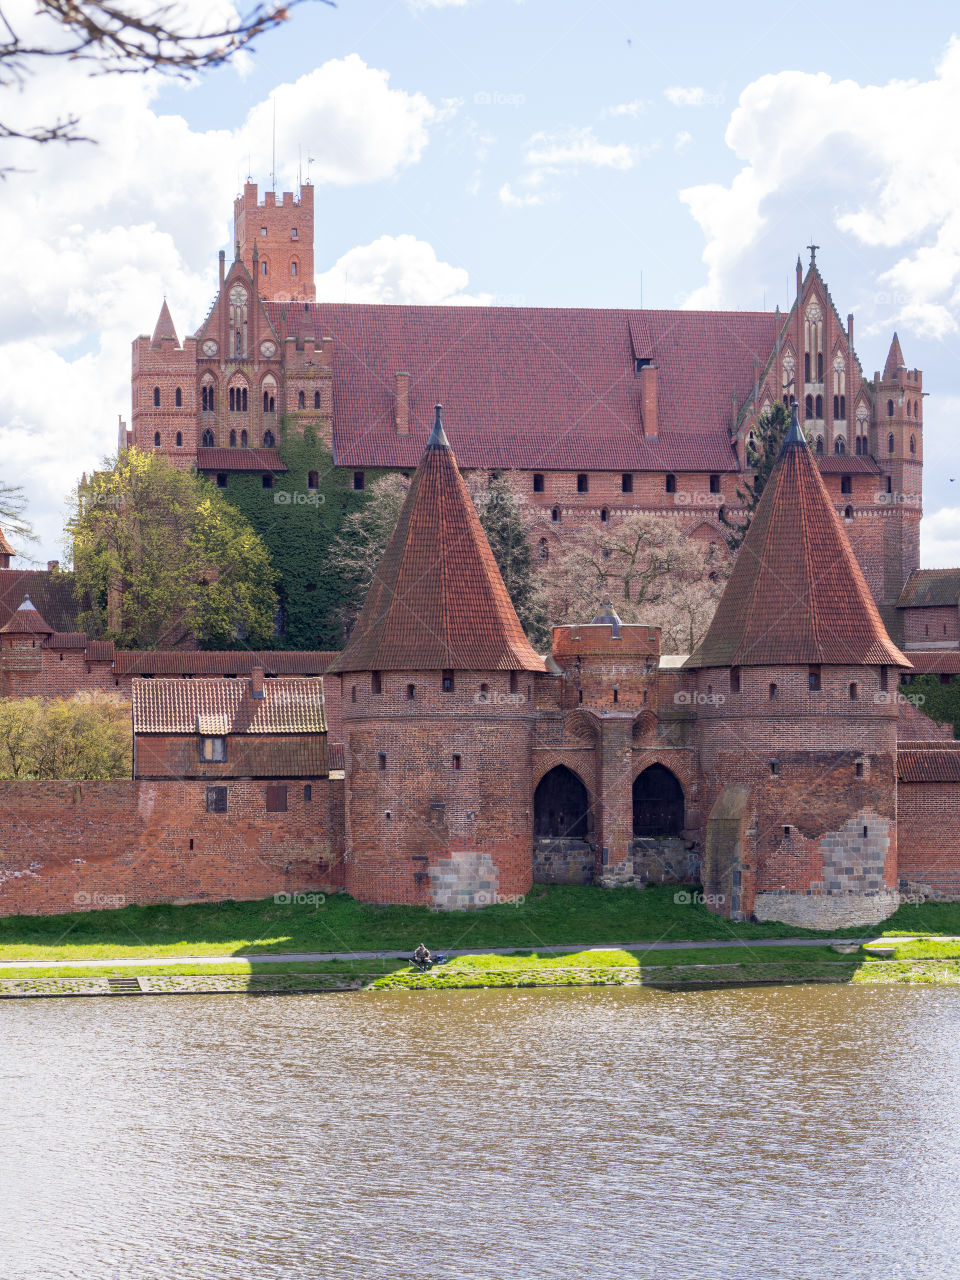 Malbork Castle, the largest in the world.